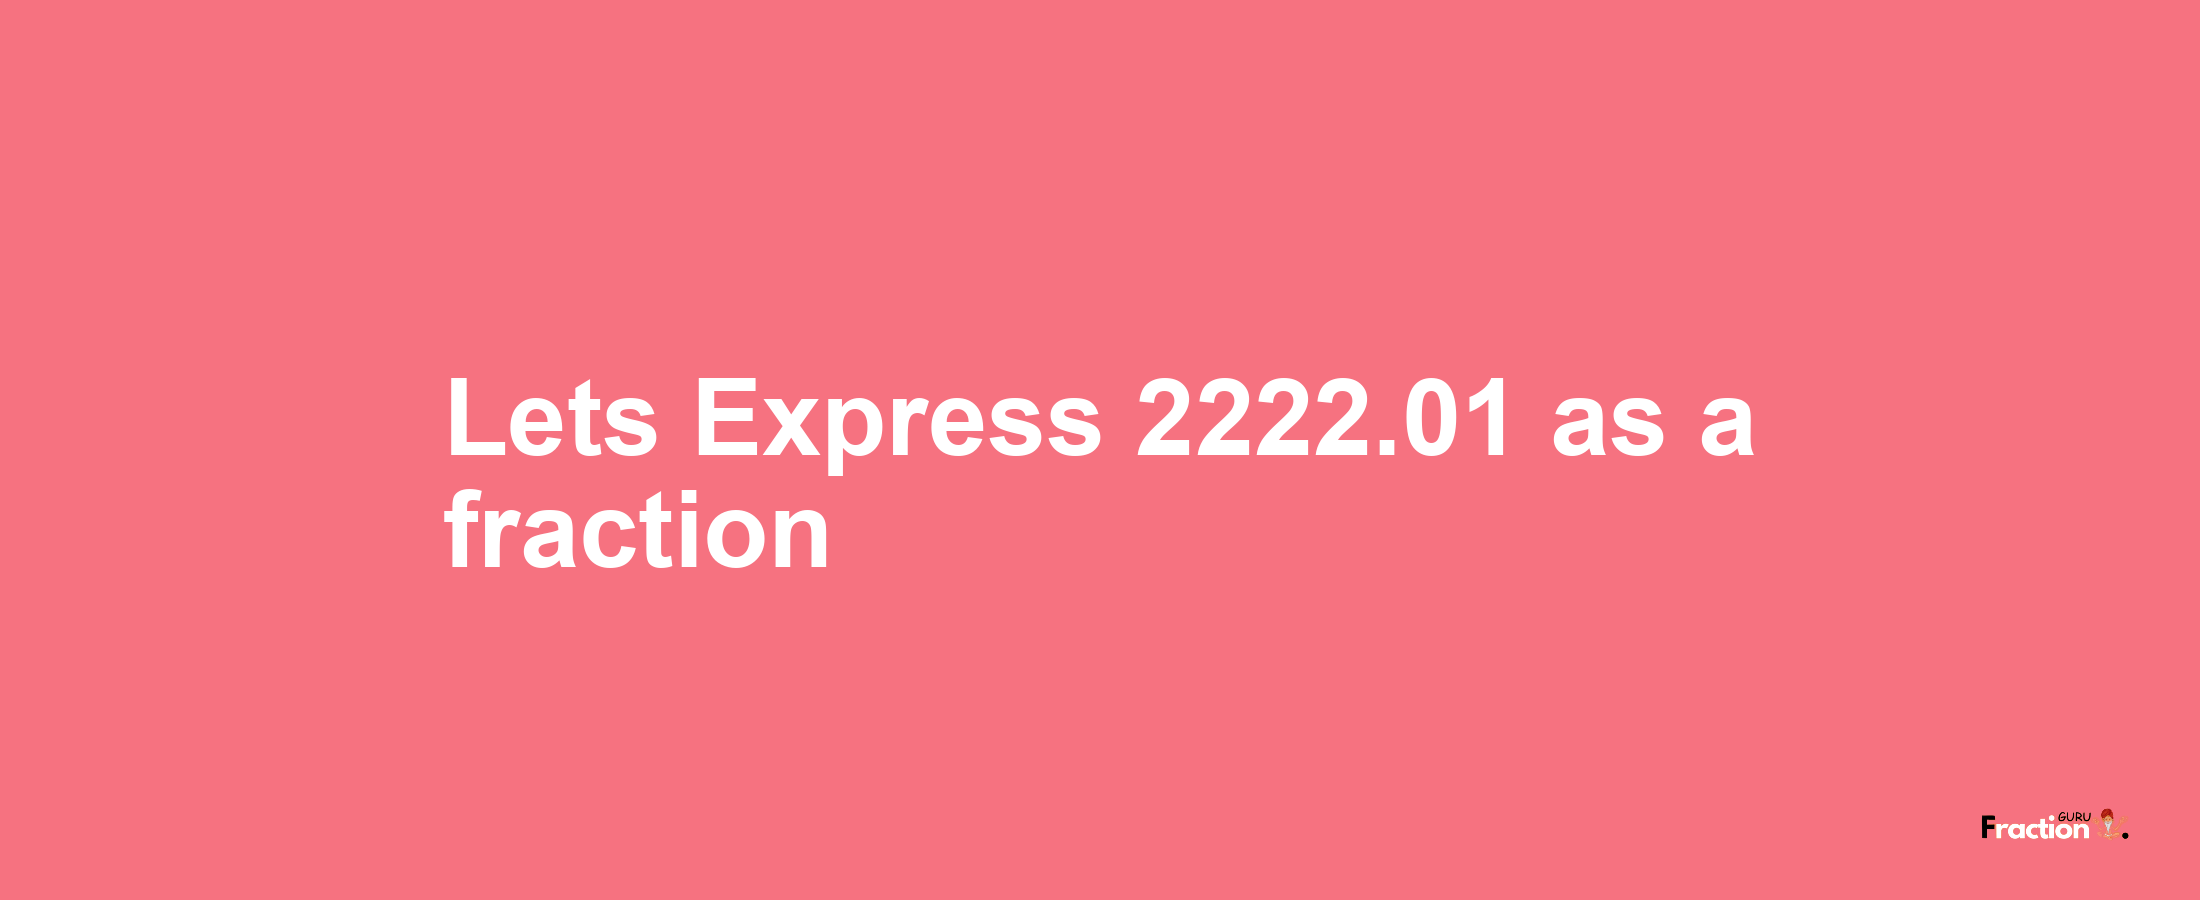 Lets Express 2222.01 as afraction